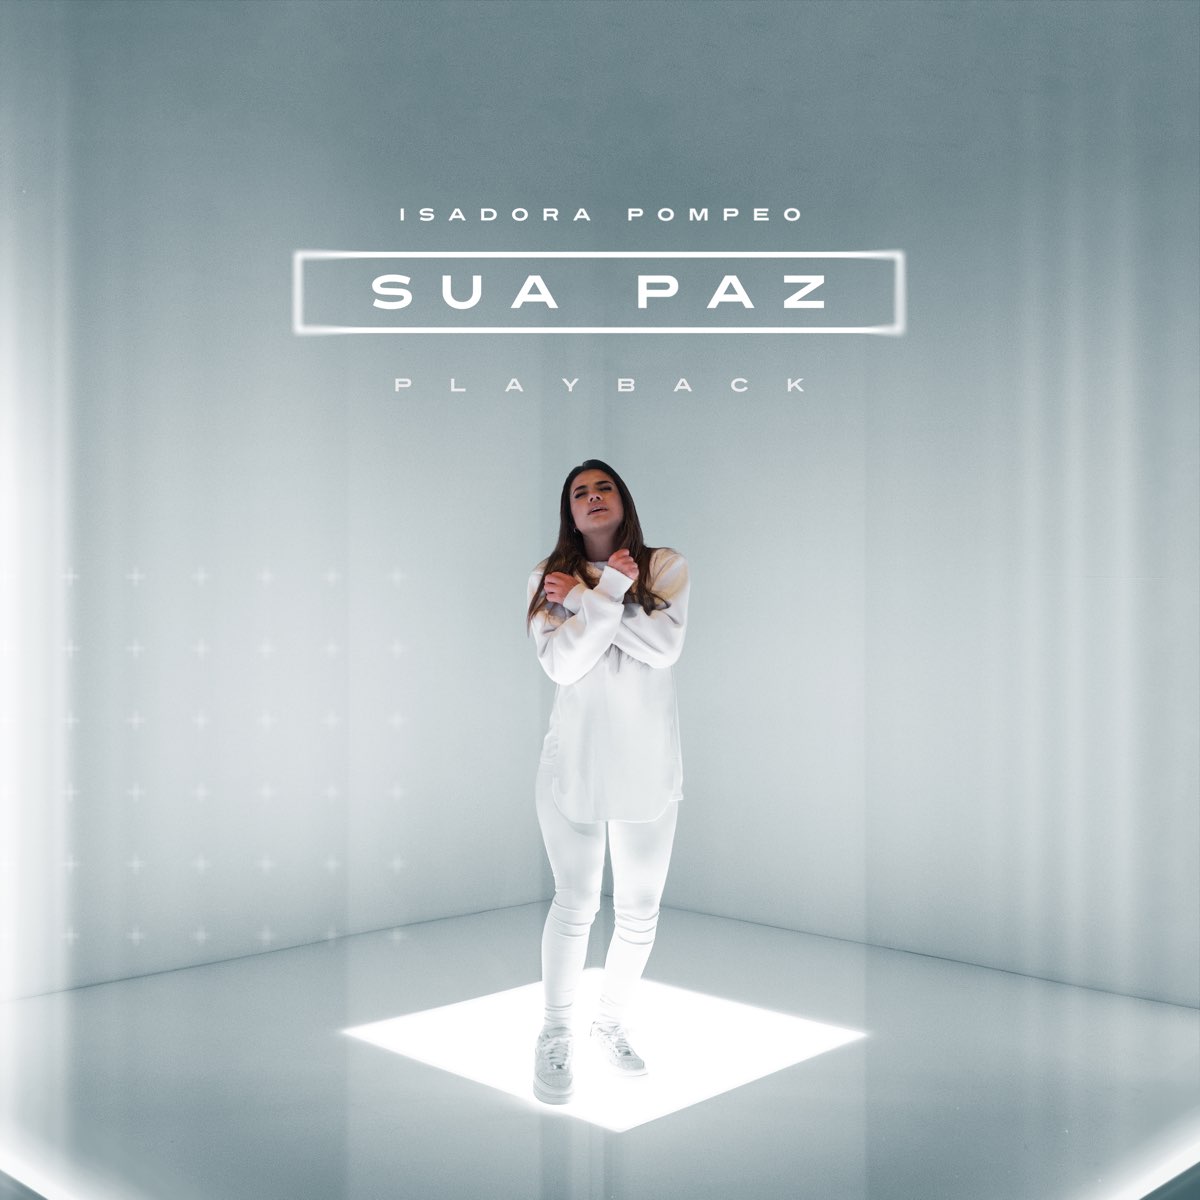 PAZ (PLAYBACK) - Musile Records